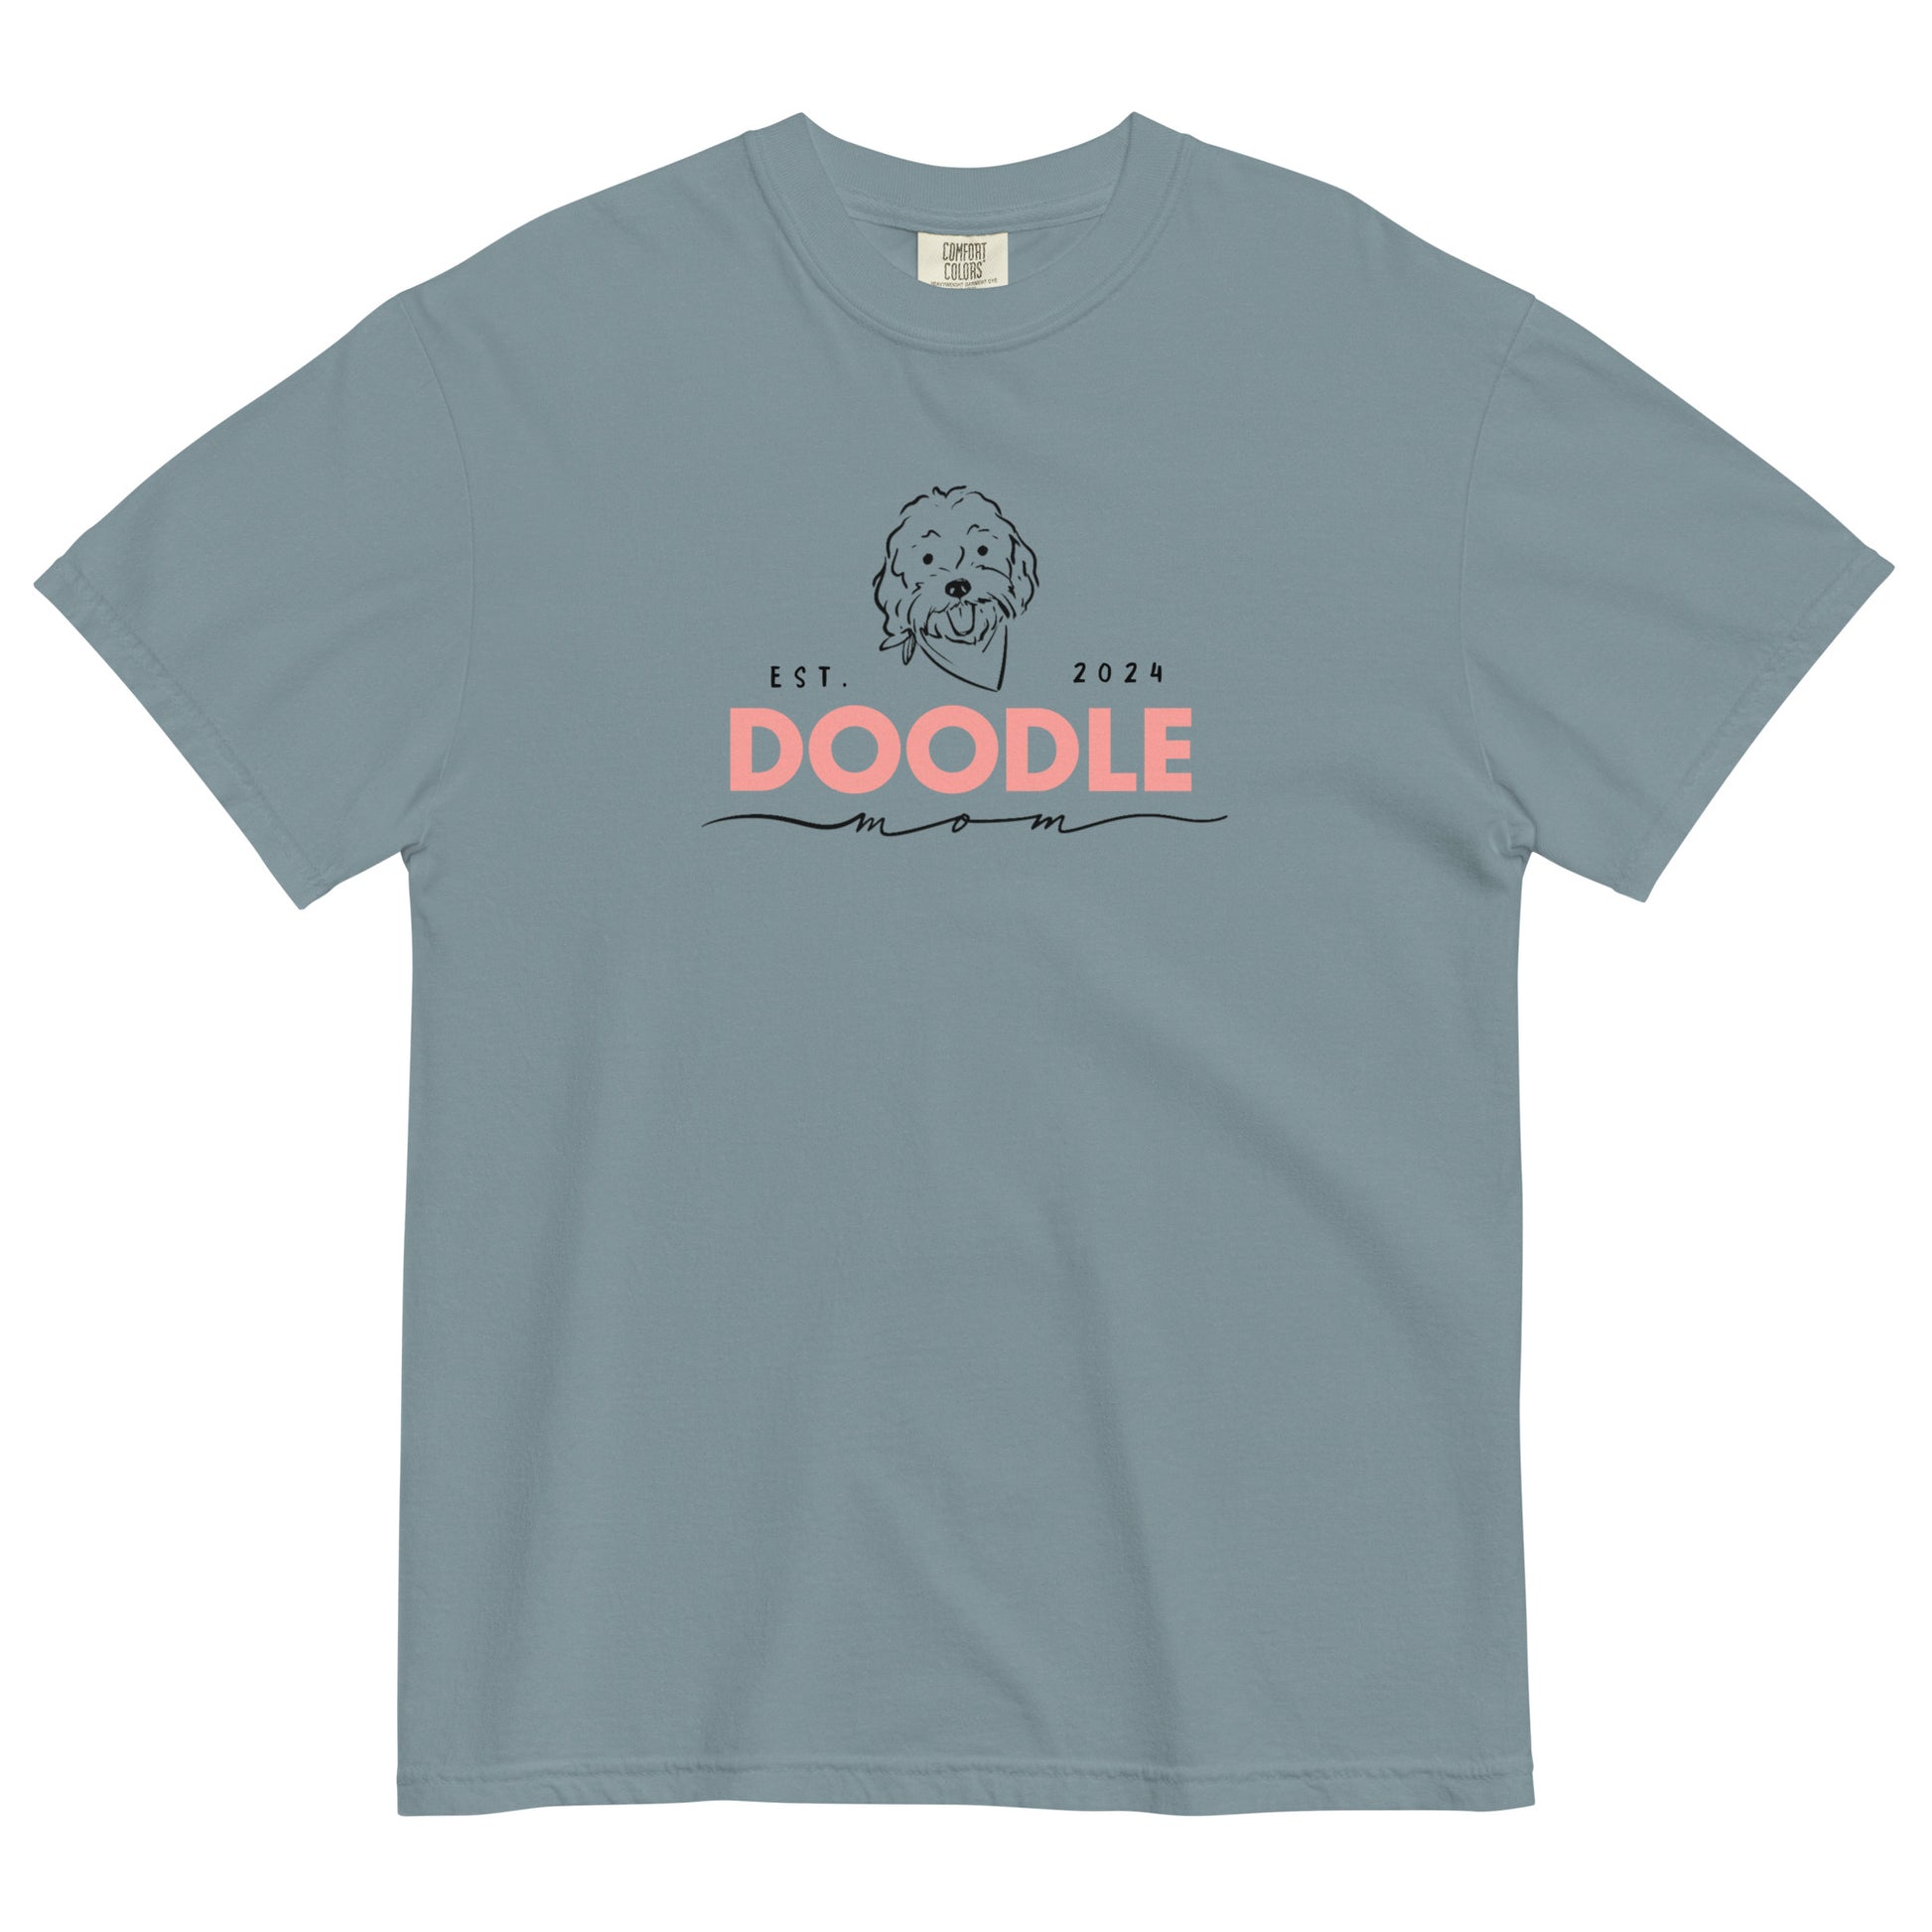 This Doodle Mom shirt features the message, "Doodle Mom Est. 2024" with a cute Doodle dog's face printed on the front of a cozy T-Shirt. The tag inside the shirt says Comfort Colors